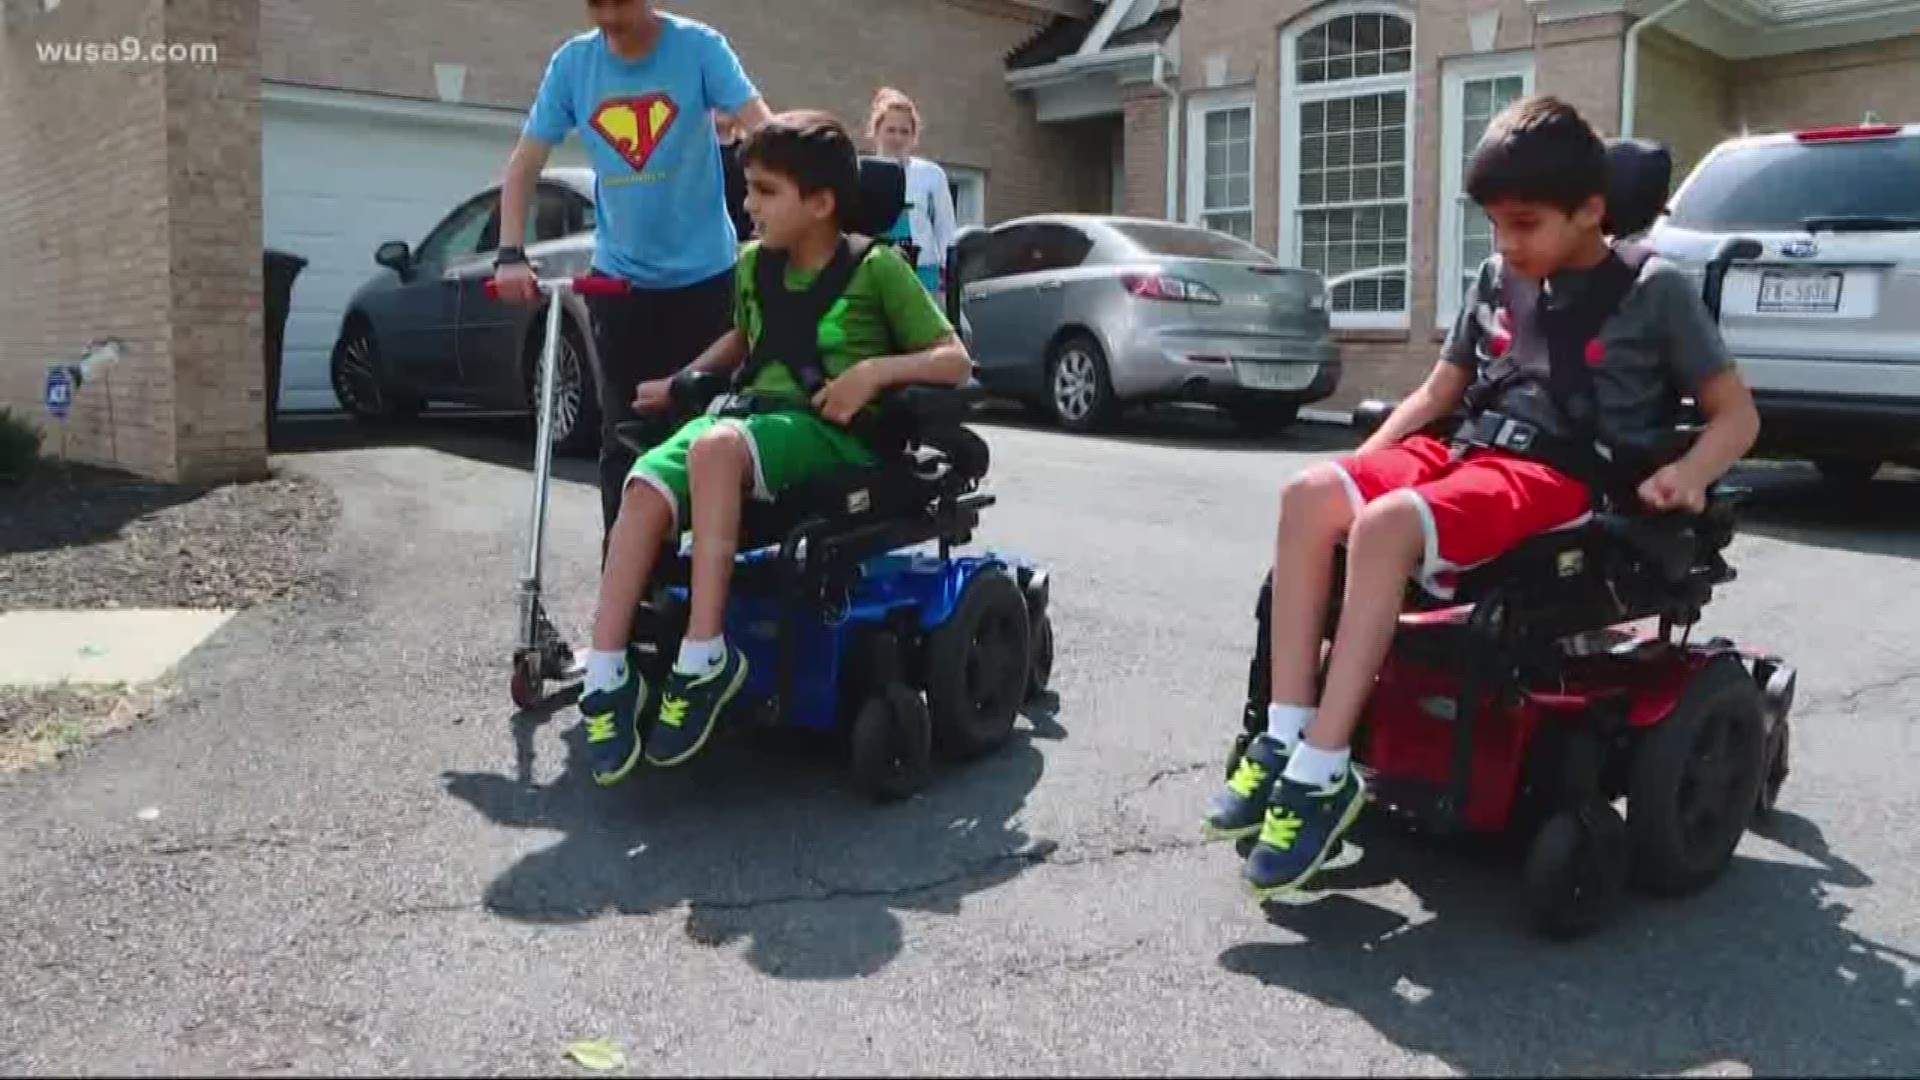 Jacob and Joshua Fernando are fighting the rare and deadly genetic disorder Ataxia-Telangiectasia. They can't ride regular bikes, but adapted bicycles cost a lot.